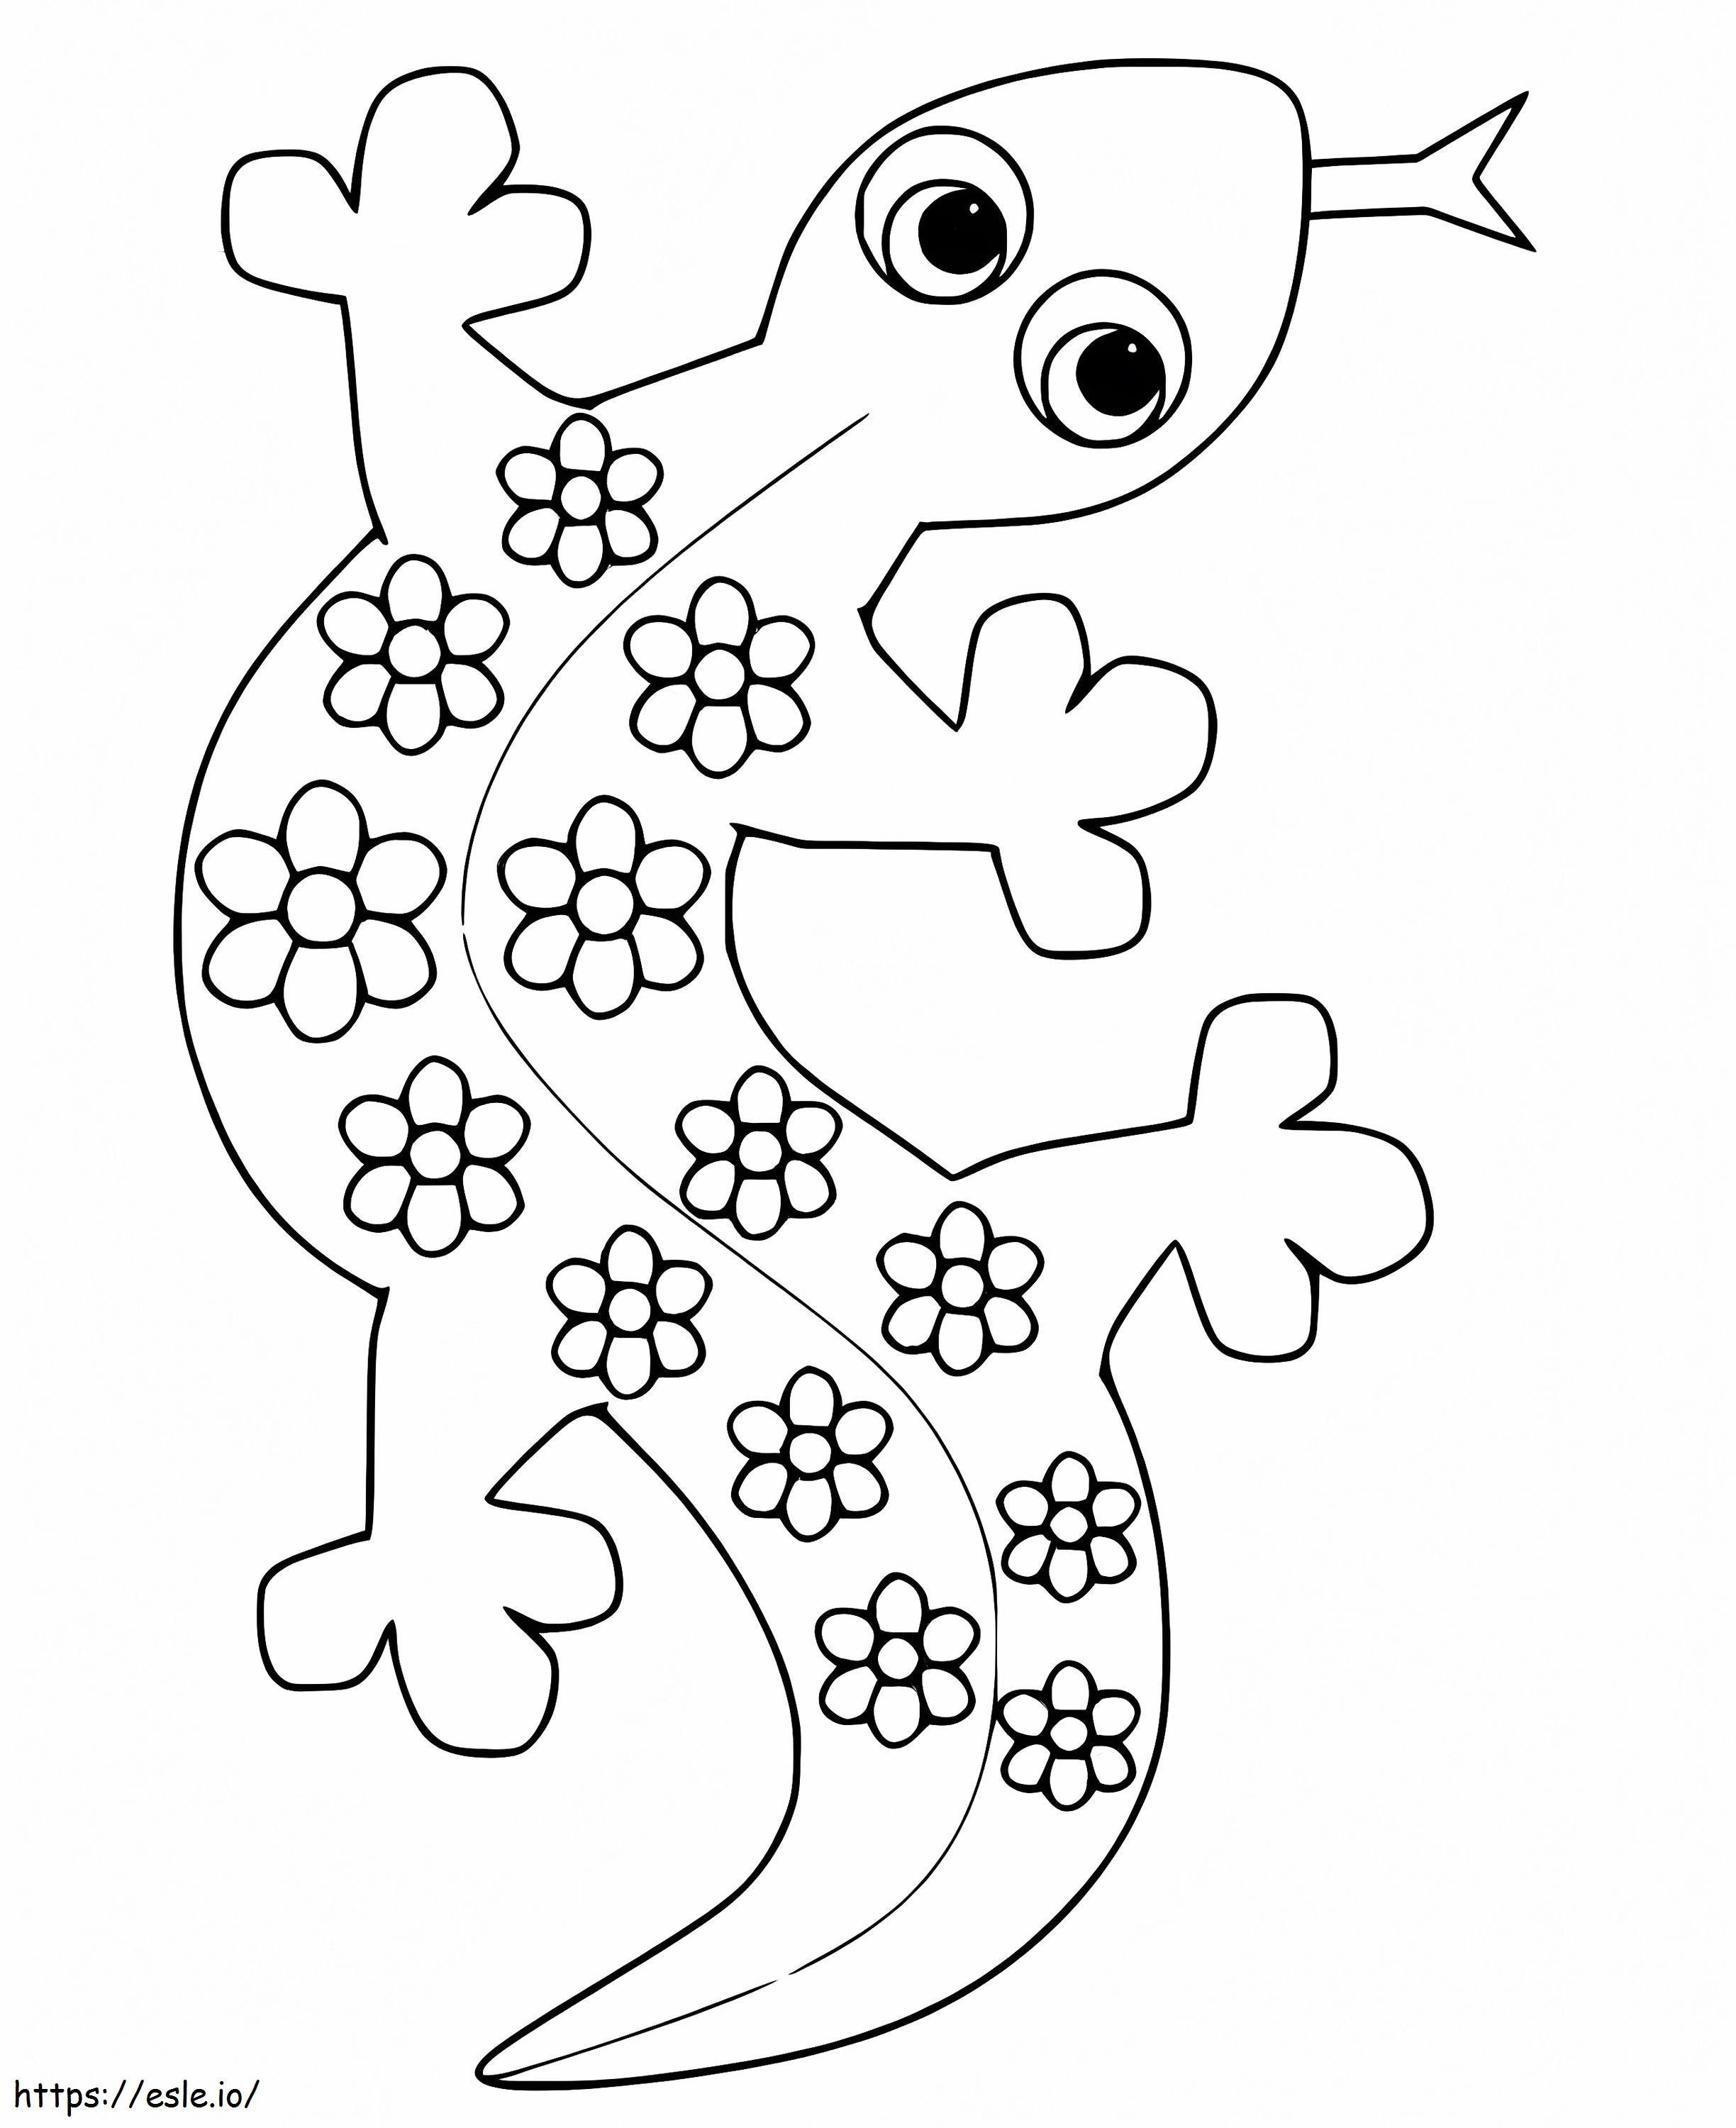 Beau Gecko coloring page